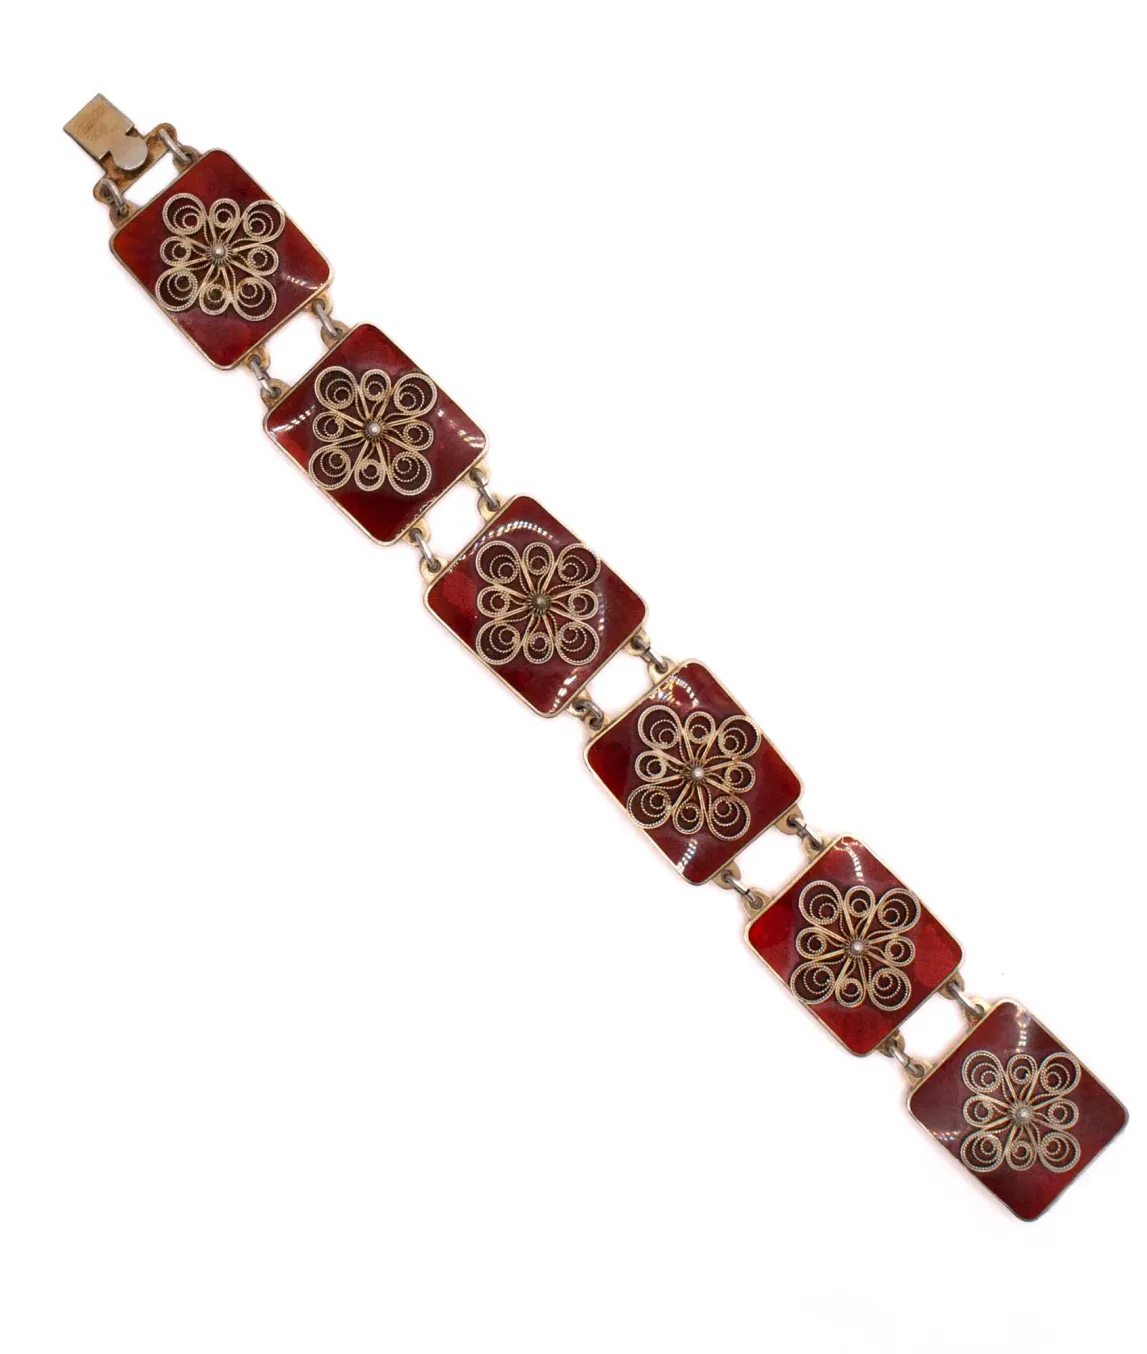 Ivar Holth red enamel panel bracelet decorated with silver filigree flowers - open flat